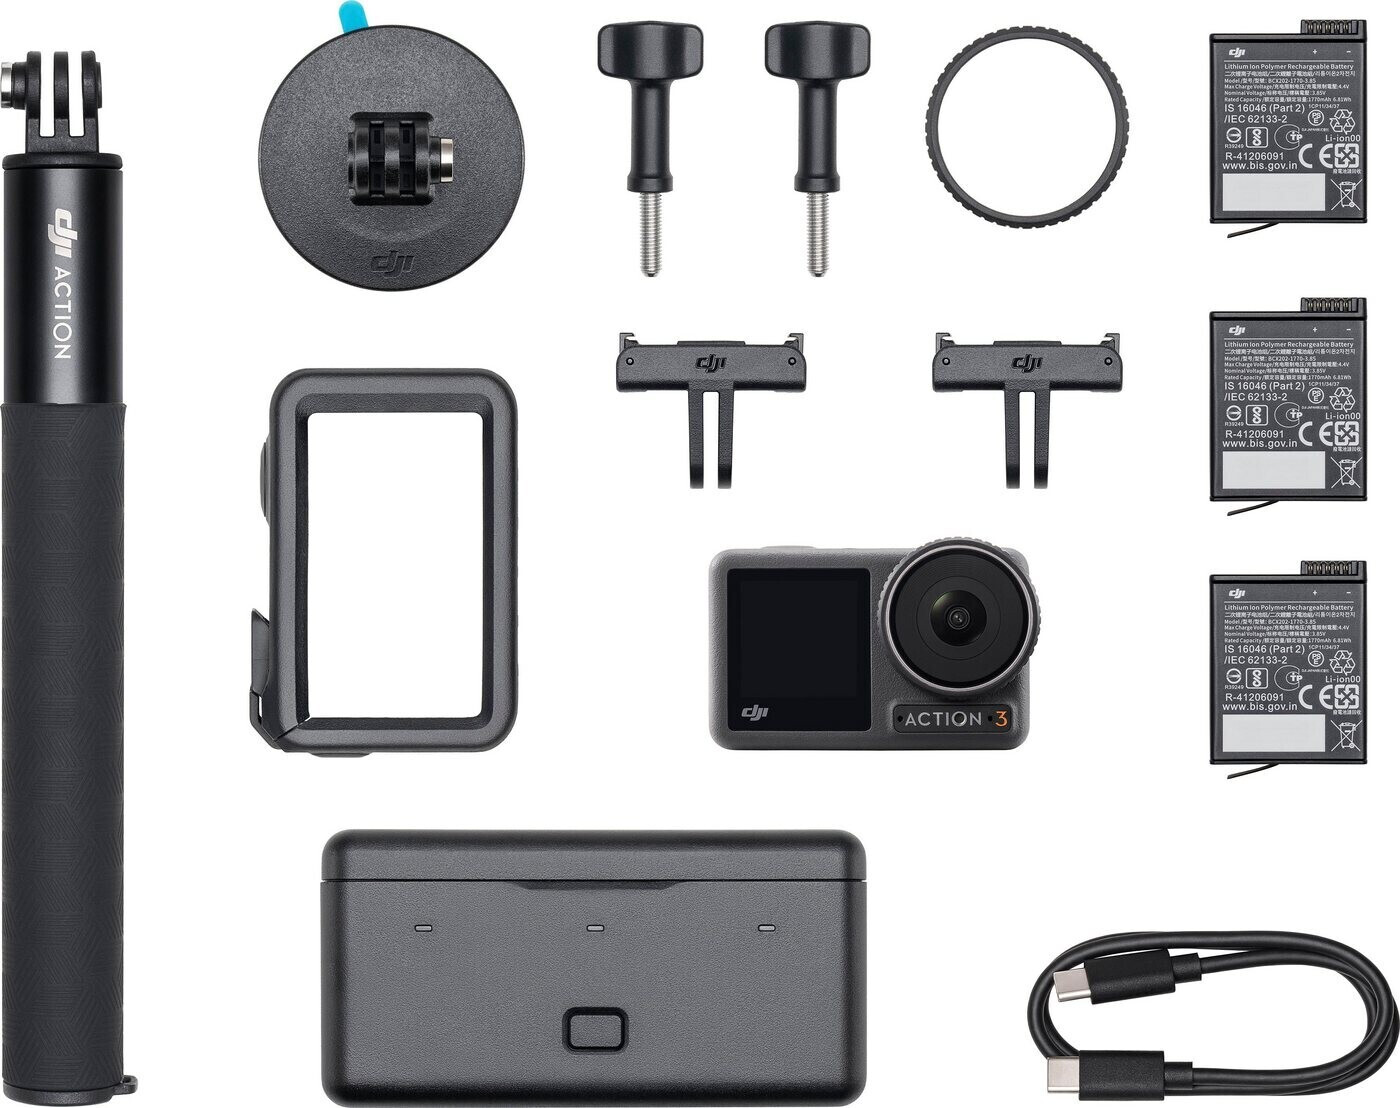 Buy DJI Osmo Action 3 from £209.00 (Today) – Best Deals on